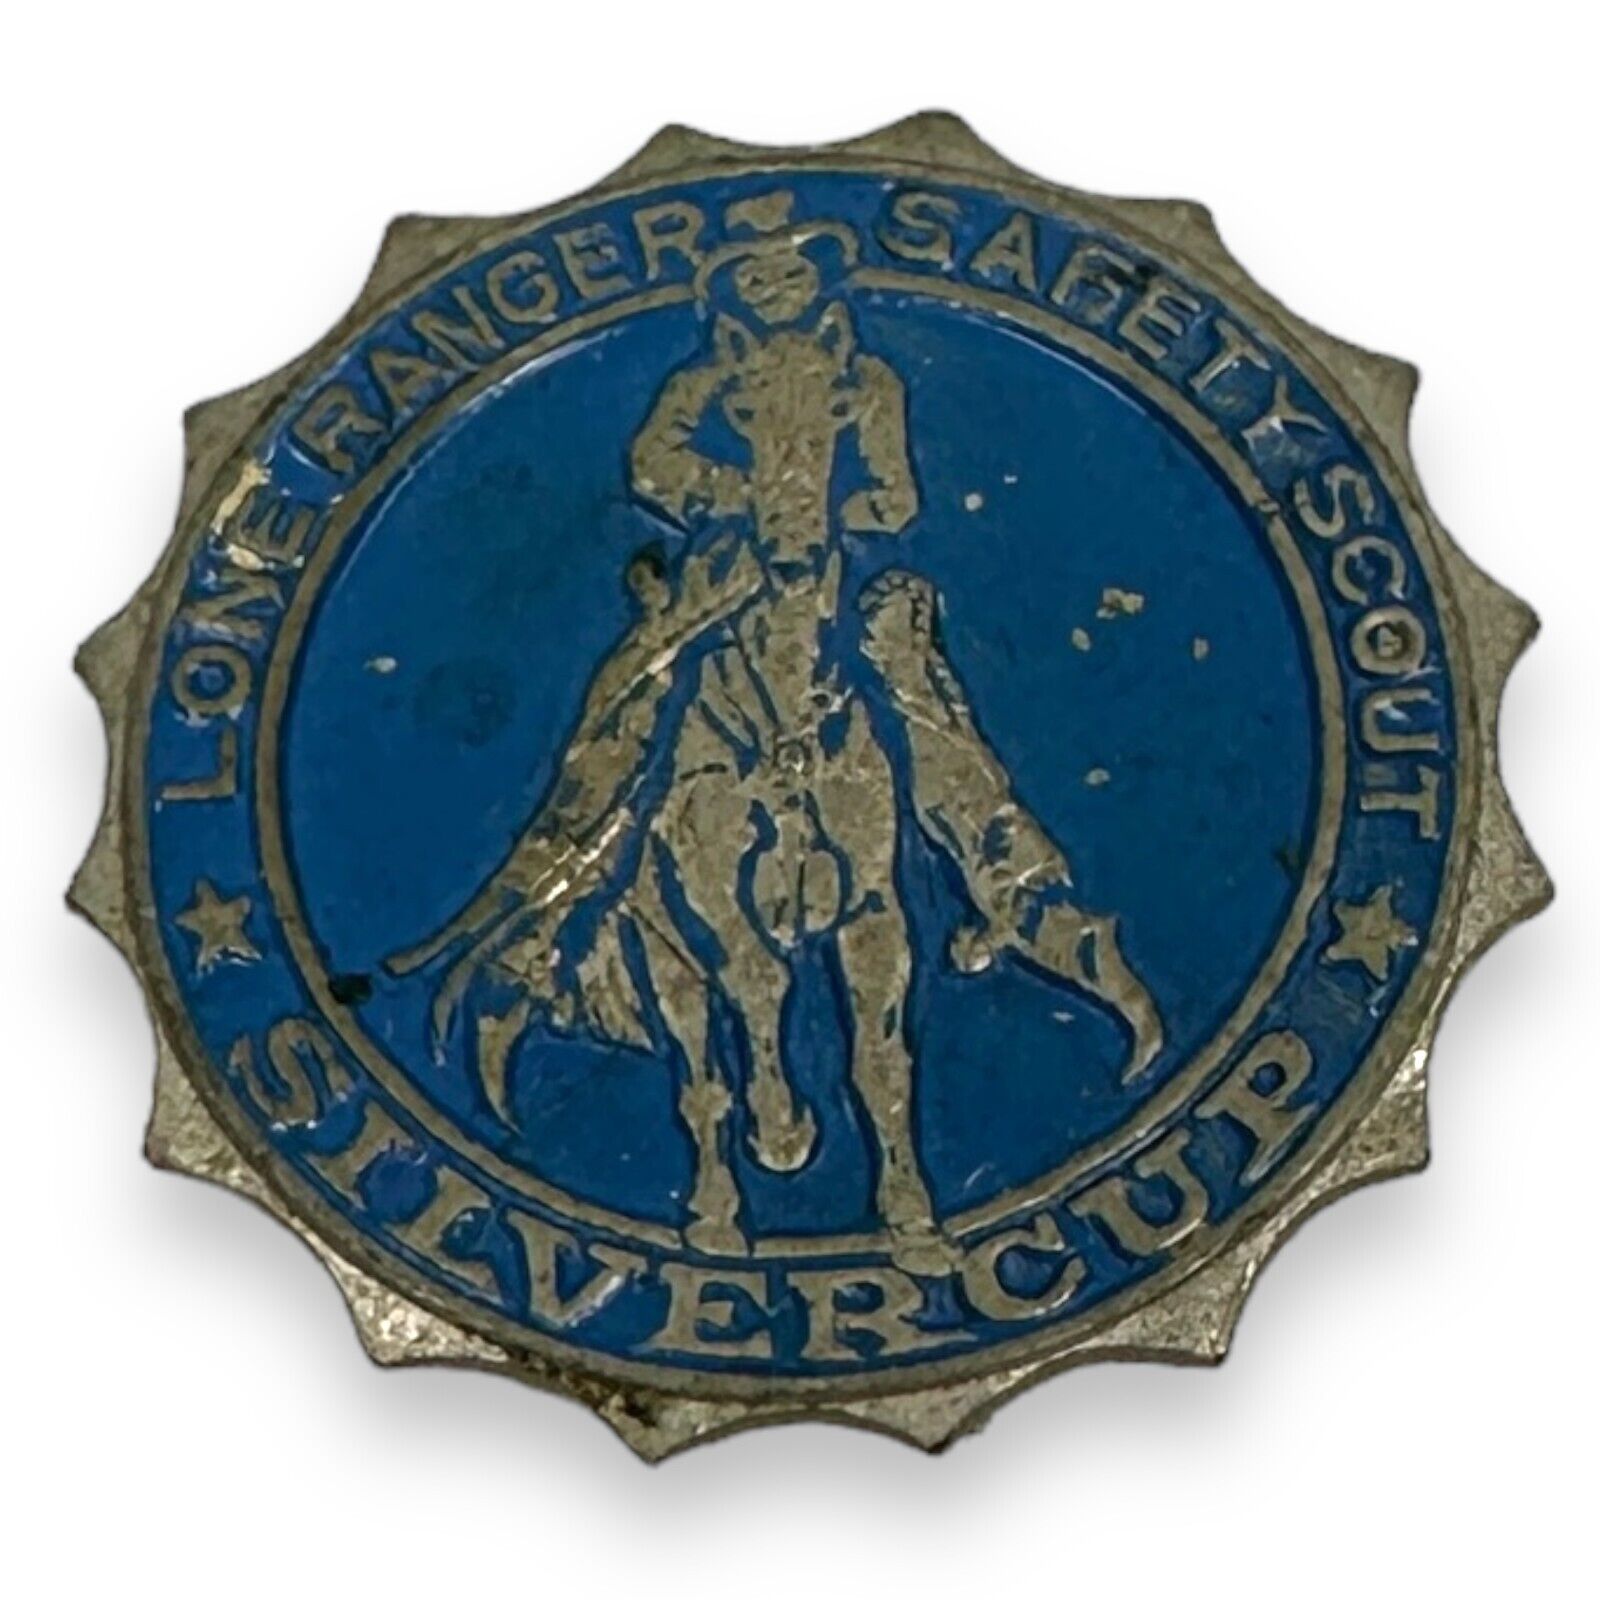 Vintage Lone Ranger Safety Scout SilverCup Pin Badge 1950s Blue Gray Advertising